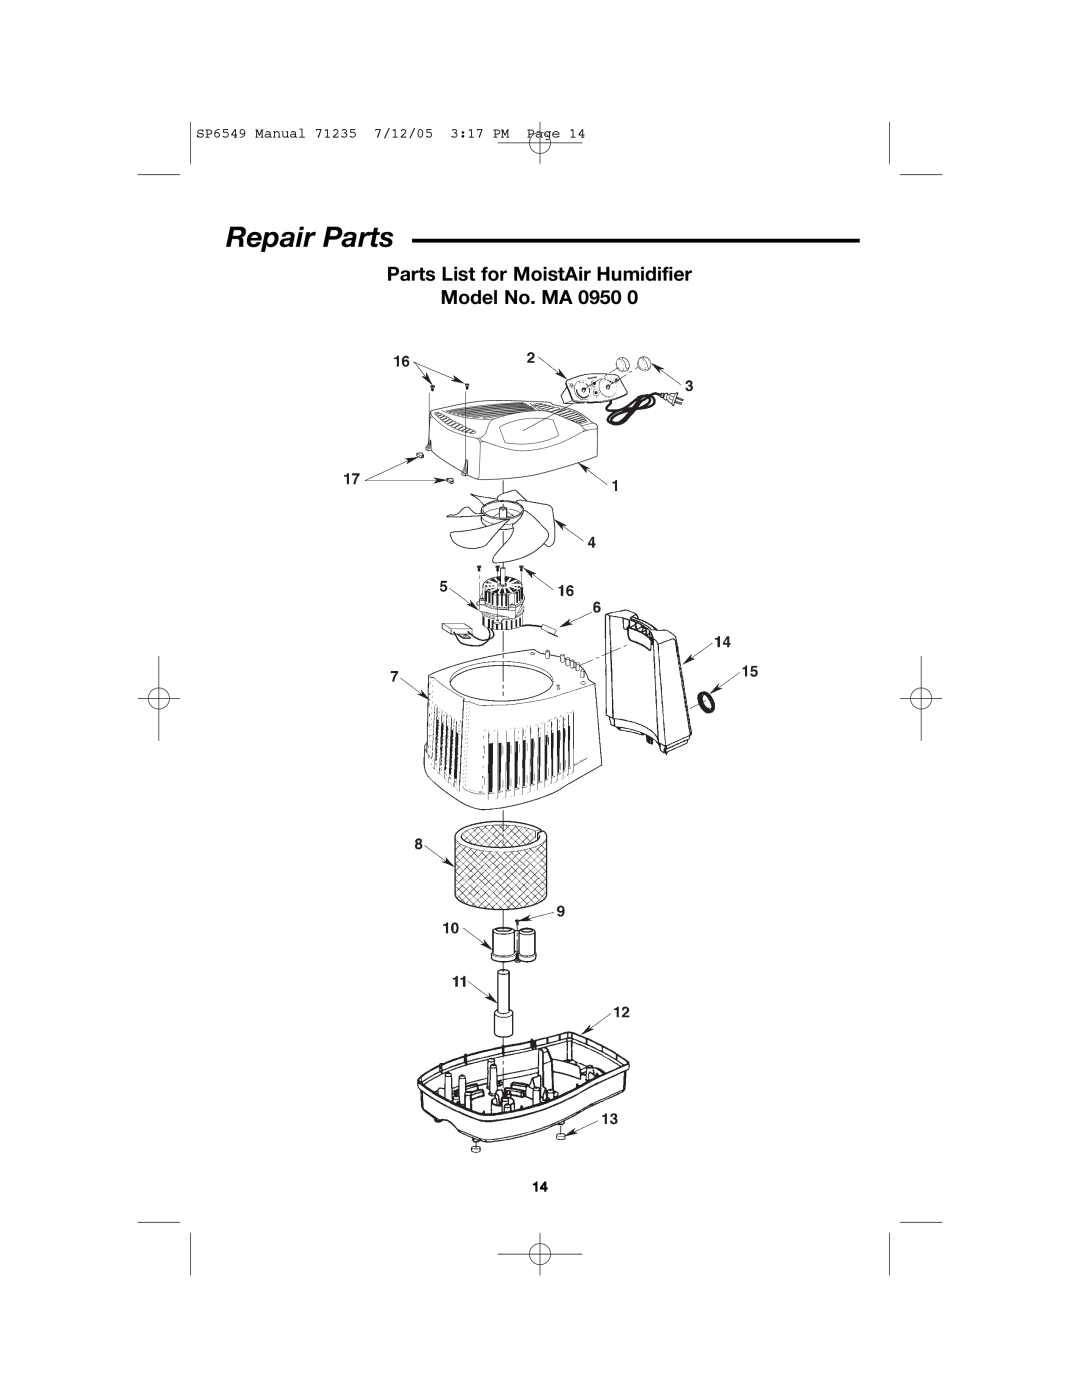 MoistAir MA 0950 Repair Parts, Parts List for MoistAir Humidifier, Model No. MA, SP6549 Manual 71235 7/12/05 3 17 PM Page 